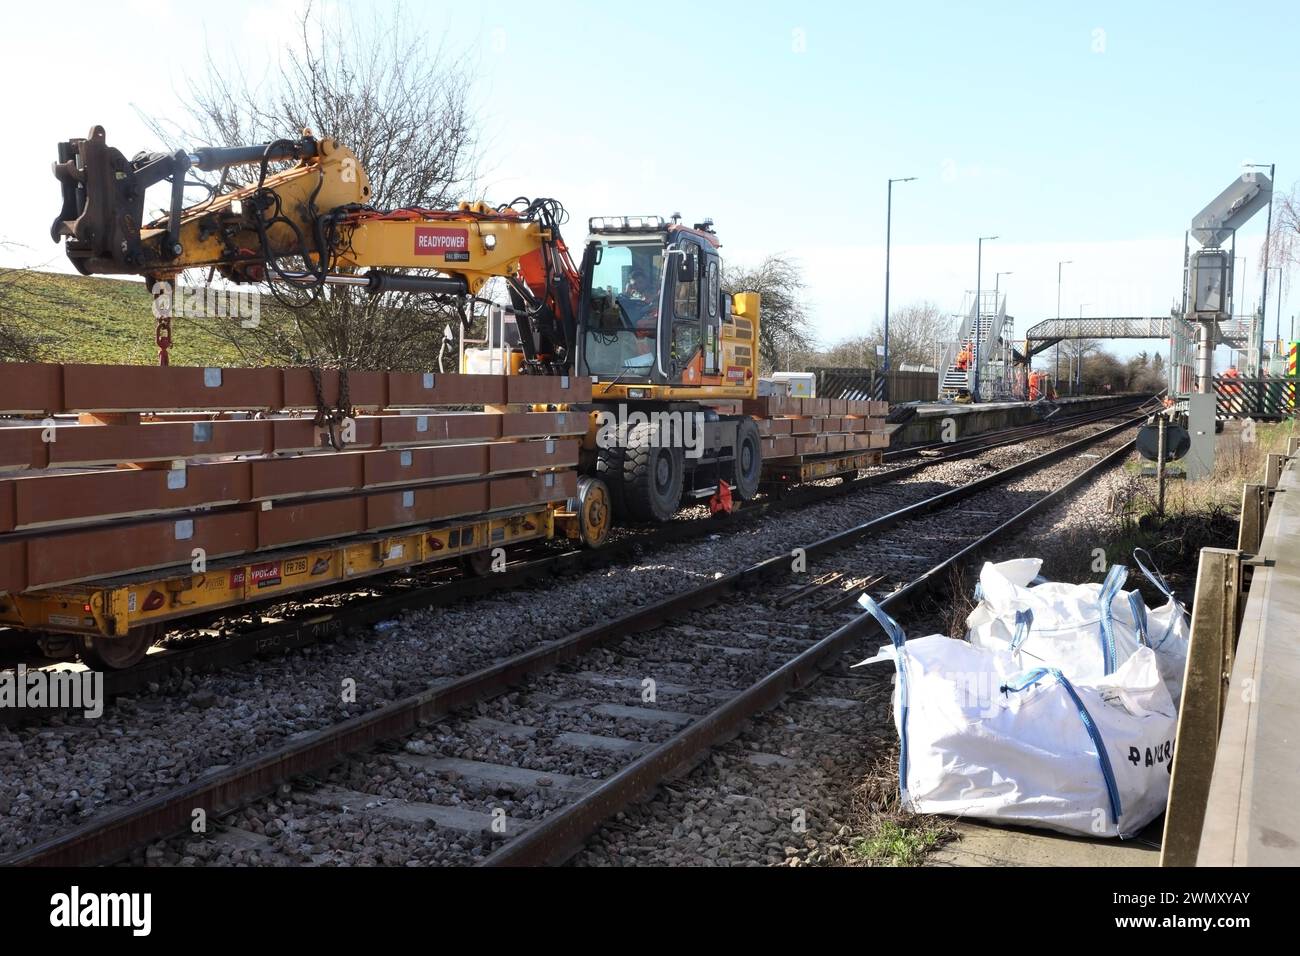 Works underway at Althorpe station, North Lincolnshire to replace the 108-year old cast iron footbridge and renew / repair the track. Stock Photo